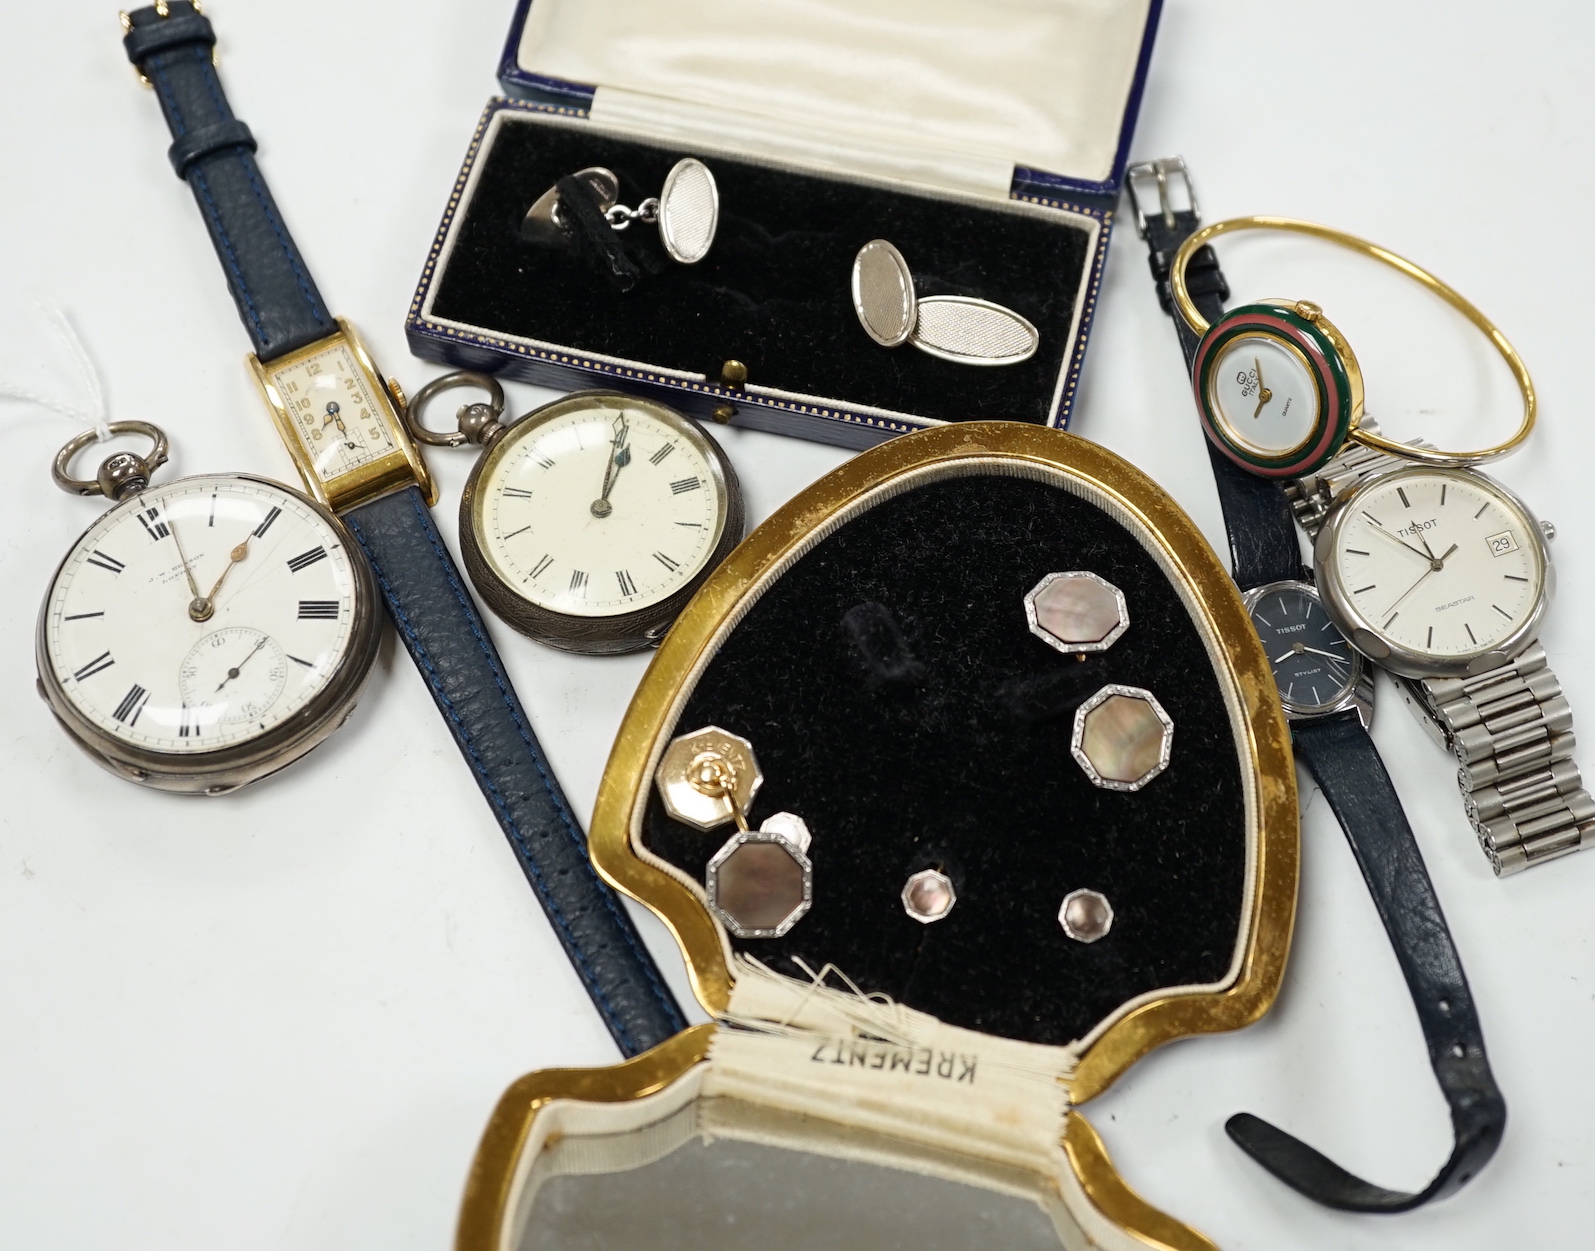 A late Victorian silver open face pocket watch, by J.W. Benson, a Swiss white metal fob watch, a lady's Gucci watch with interchangeable bezels, a pair of engine tuned silver cufflinks, and other sundry watches and jewel